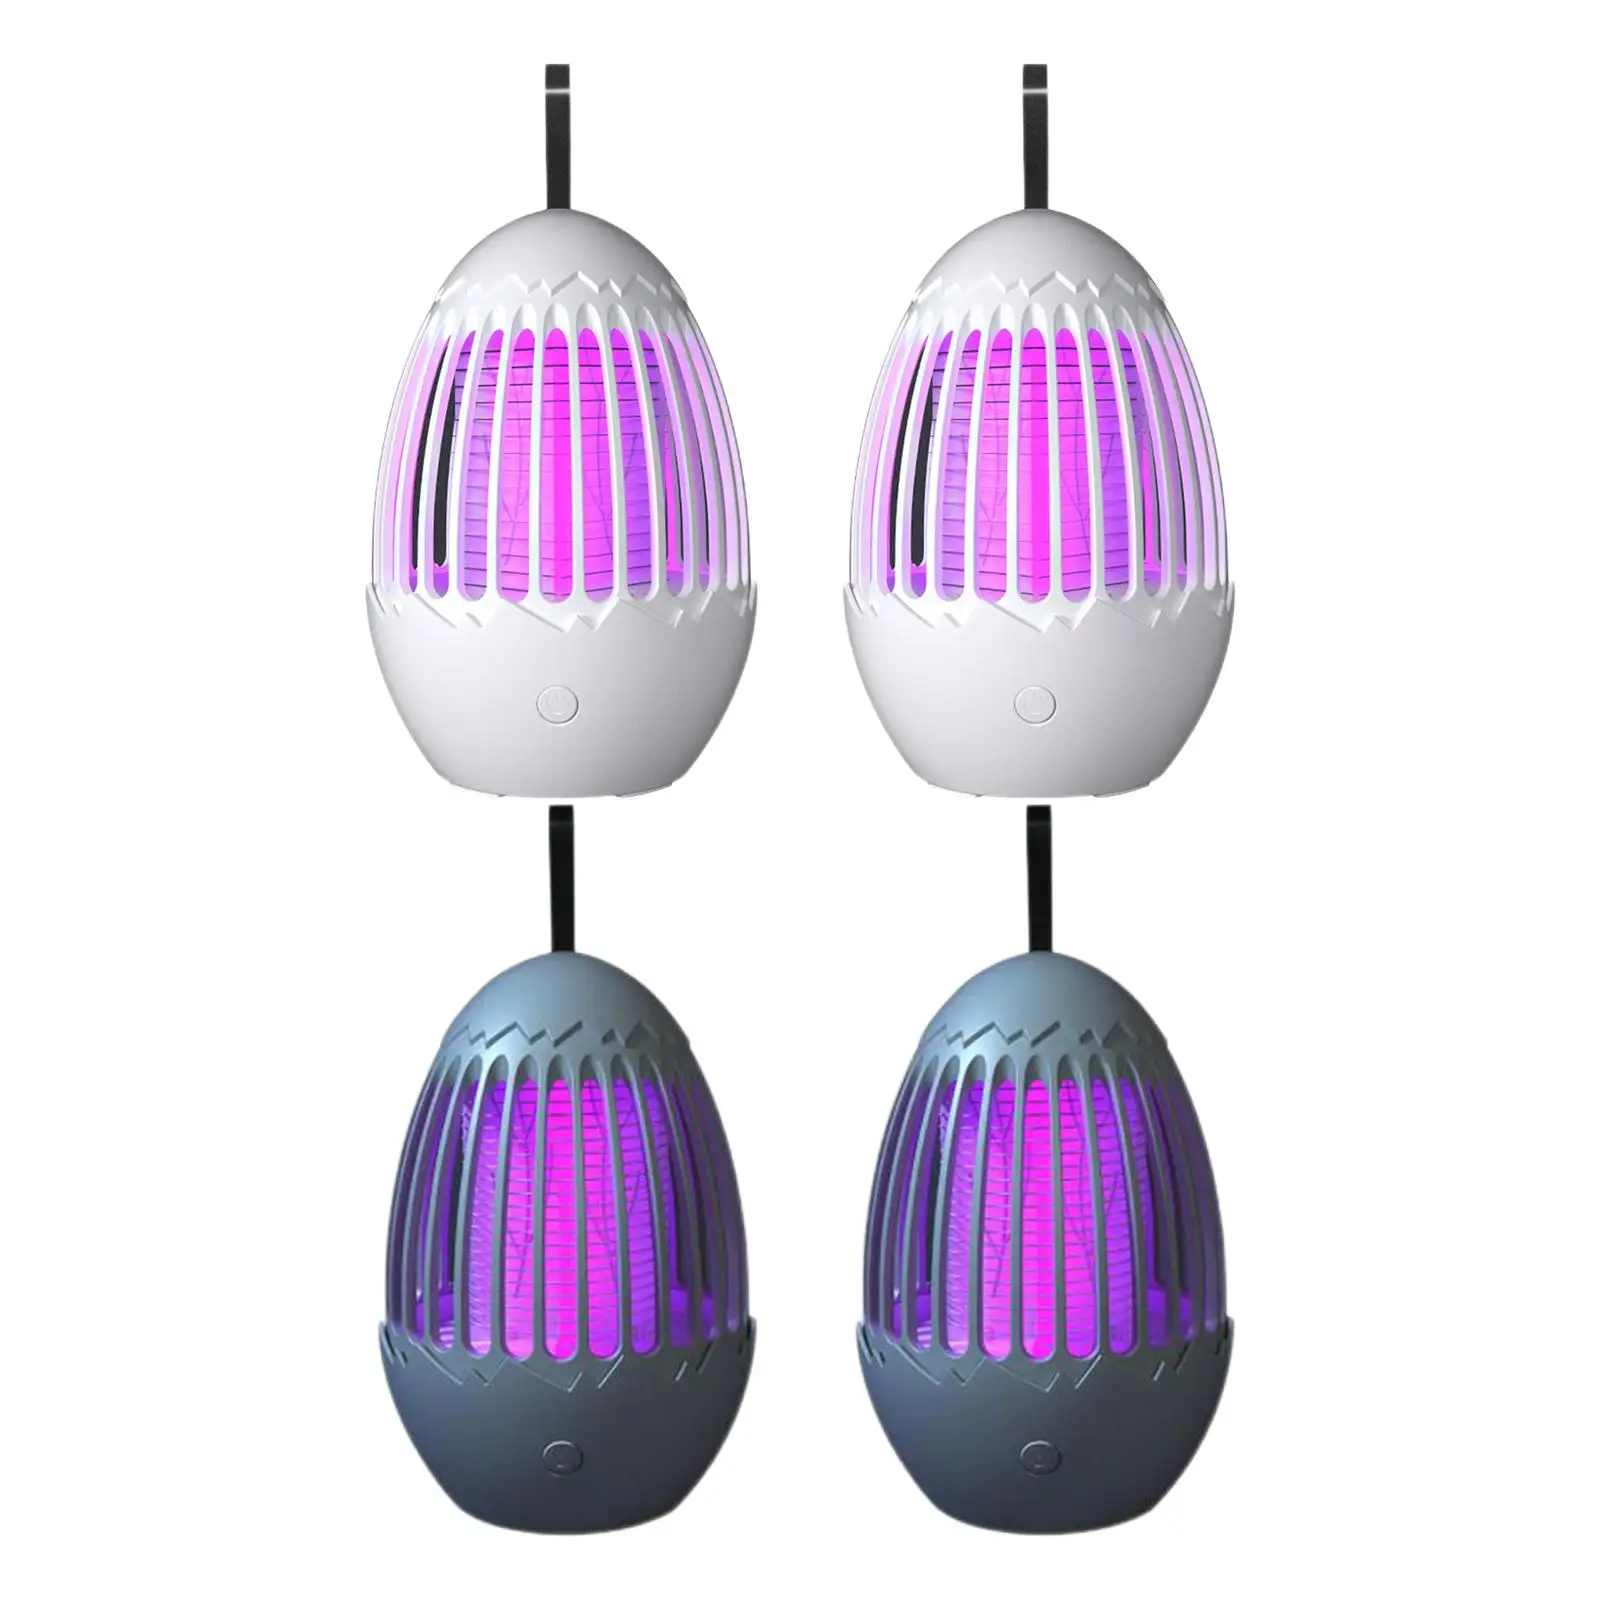 Mosquito Killer Lamp Efficient Egg Shape 5W Energy Saving Fly Repel Anti Mosquito Light for Bedroom Patio Camping Garden Hiking